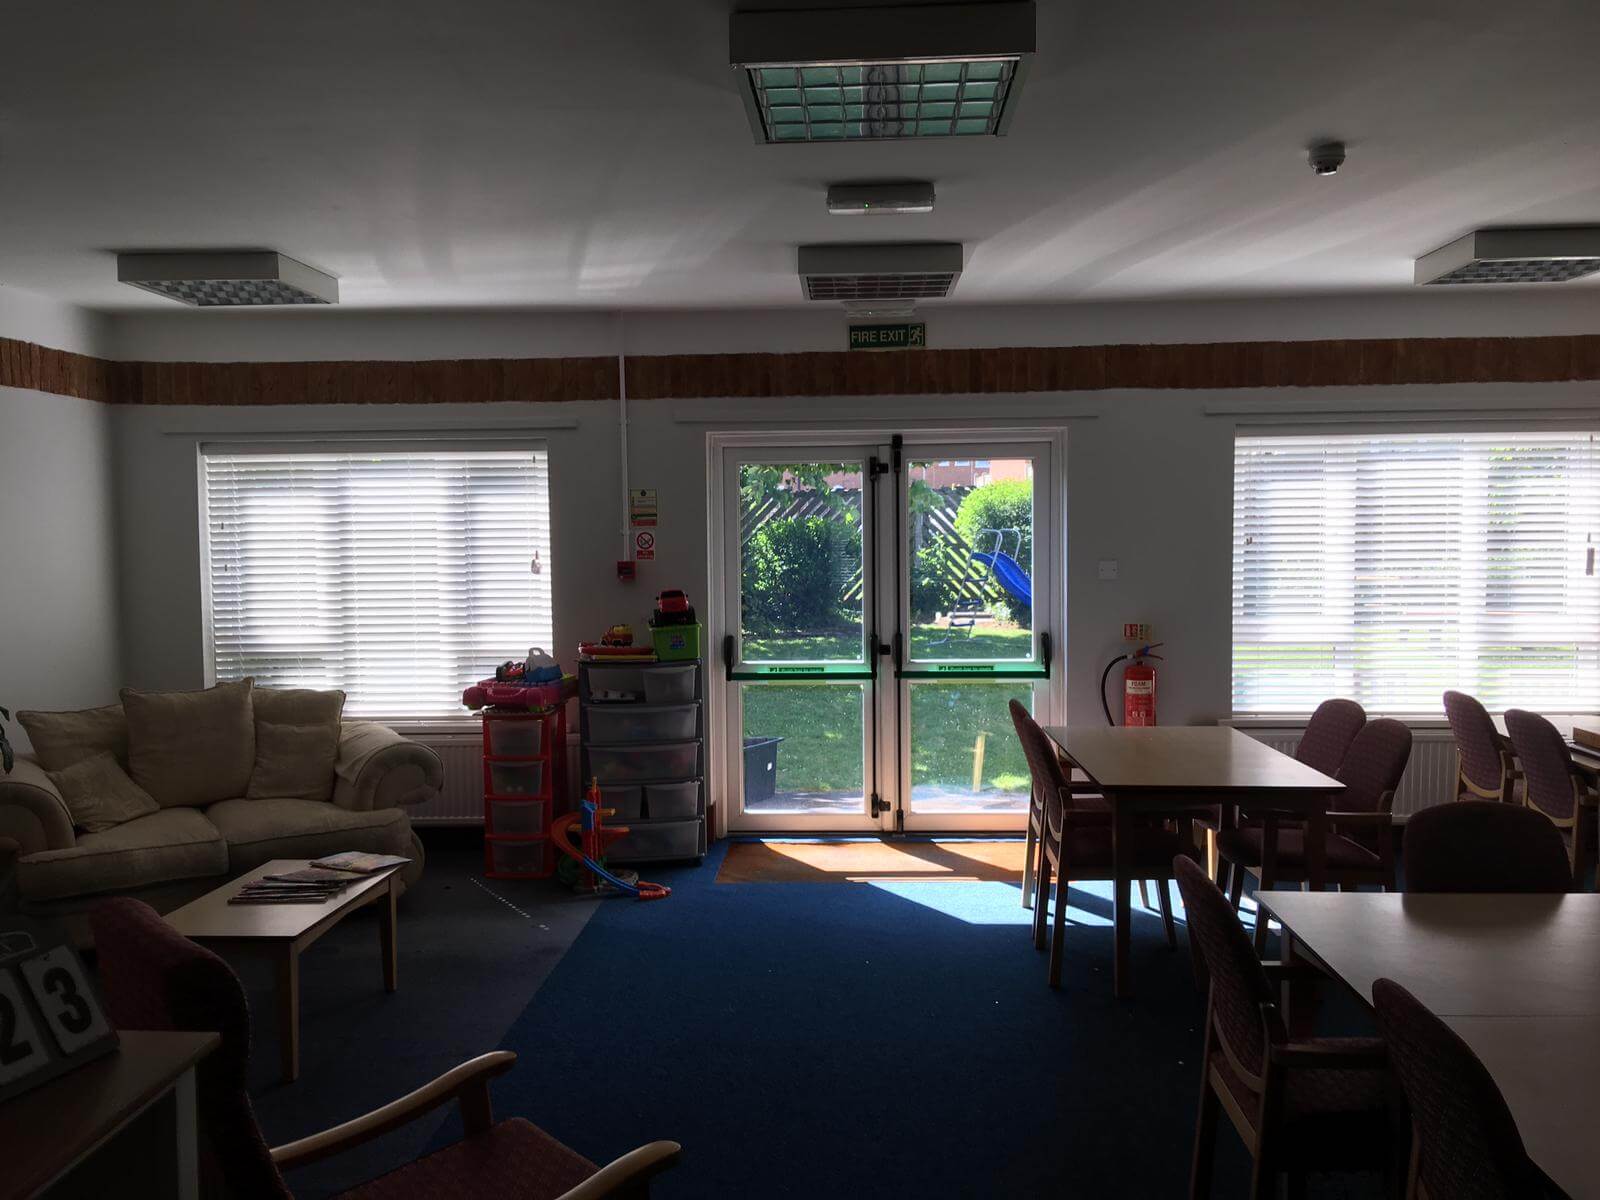 Commercial Blinds For Care Homes Sutton-In-Ashfield